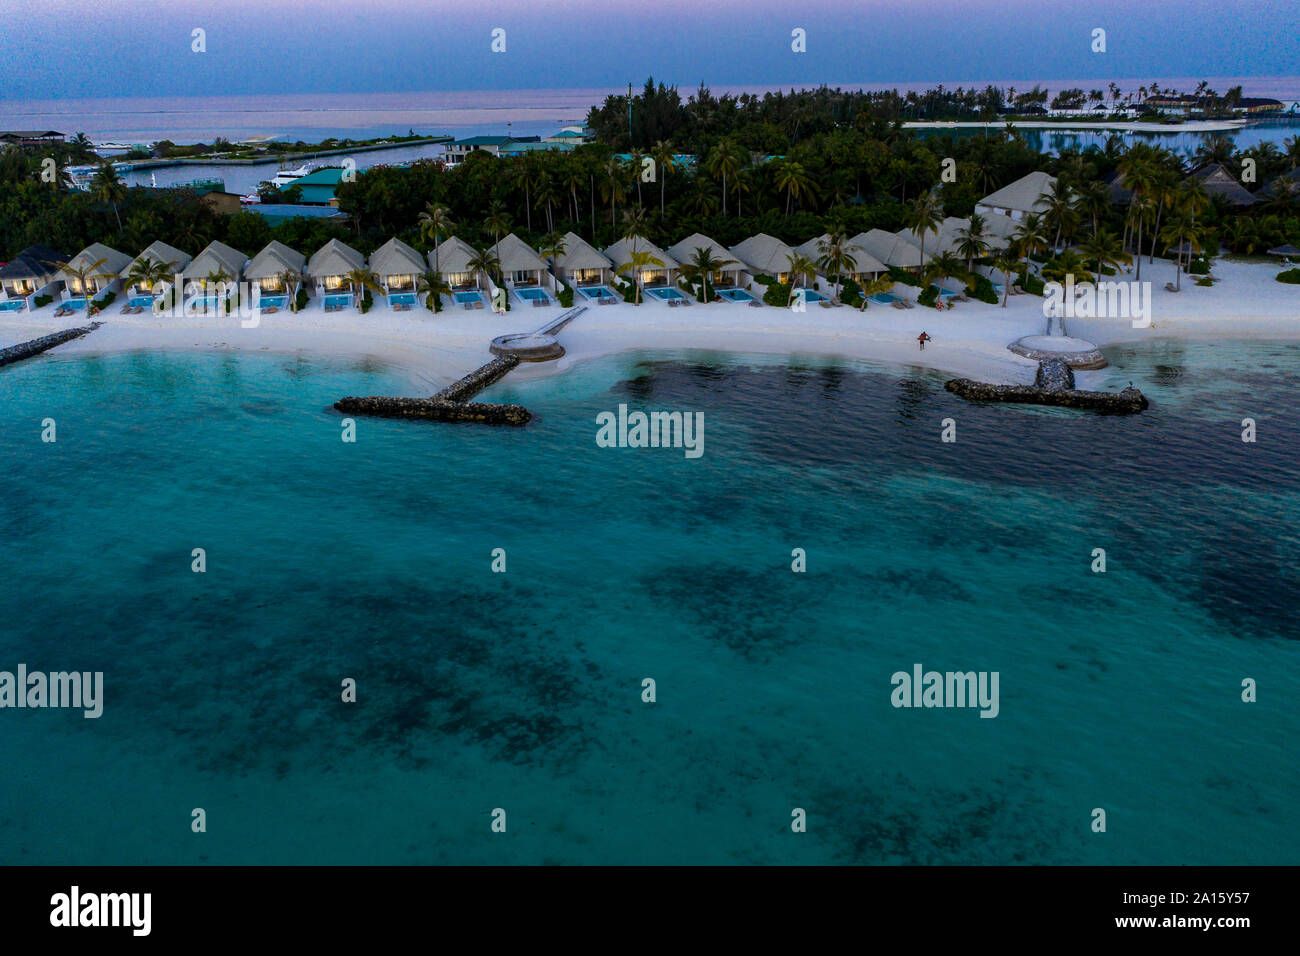 Maldives, Olhuveli island, Resort and piers on South Male Atoll lagoon at sunset Stock Photo